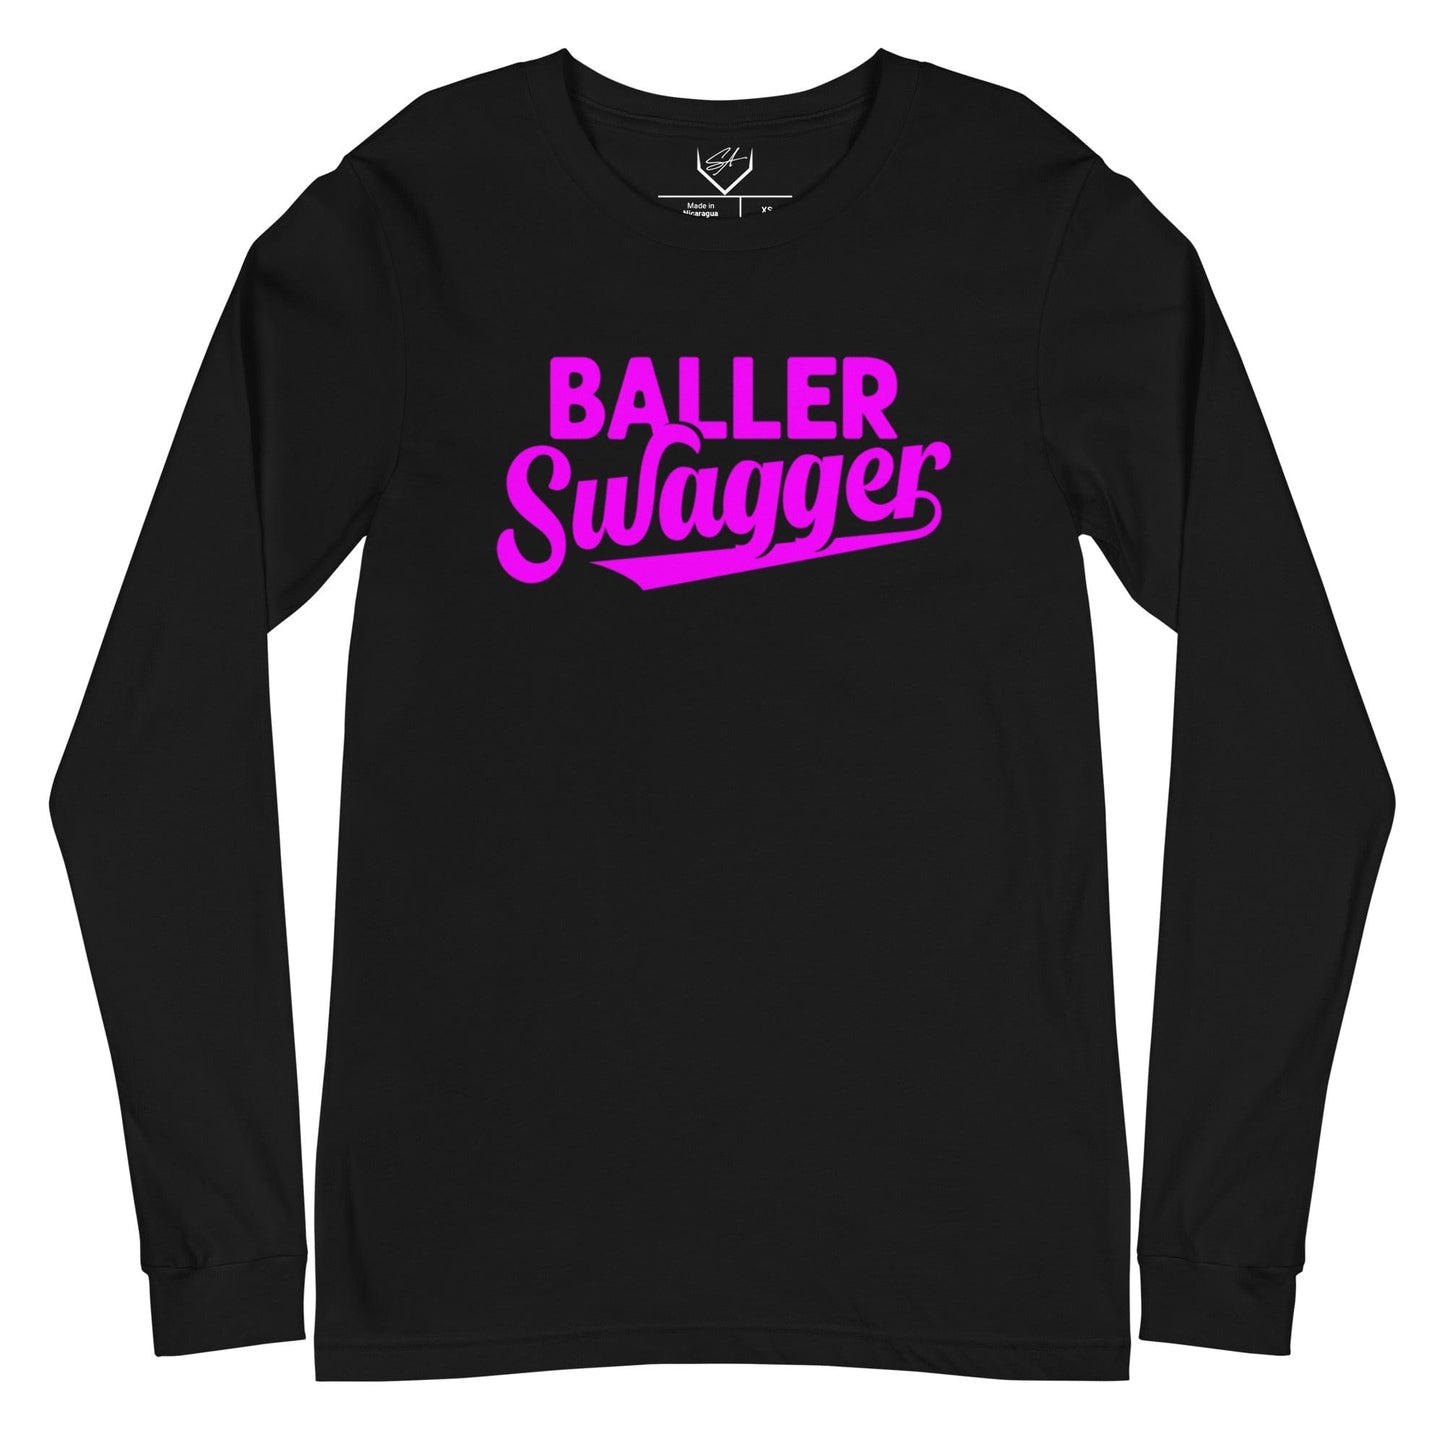 Baller Swagger Pink - Adult Long Sleeve